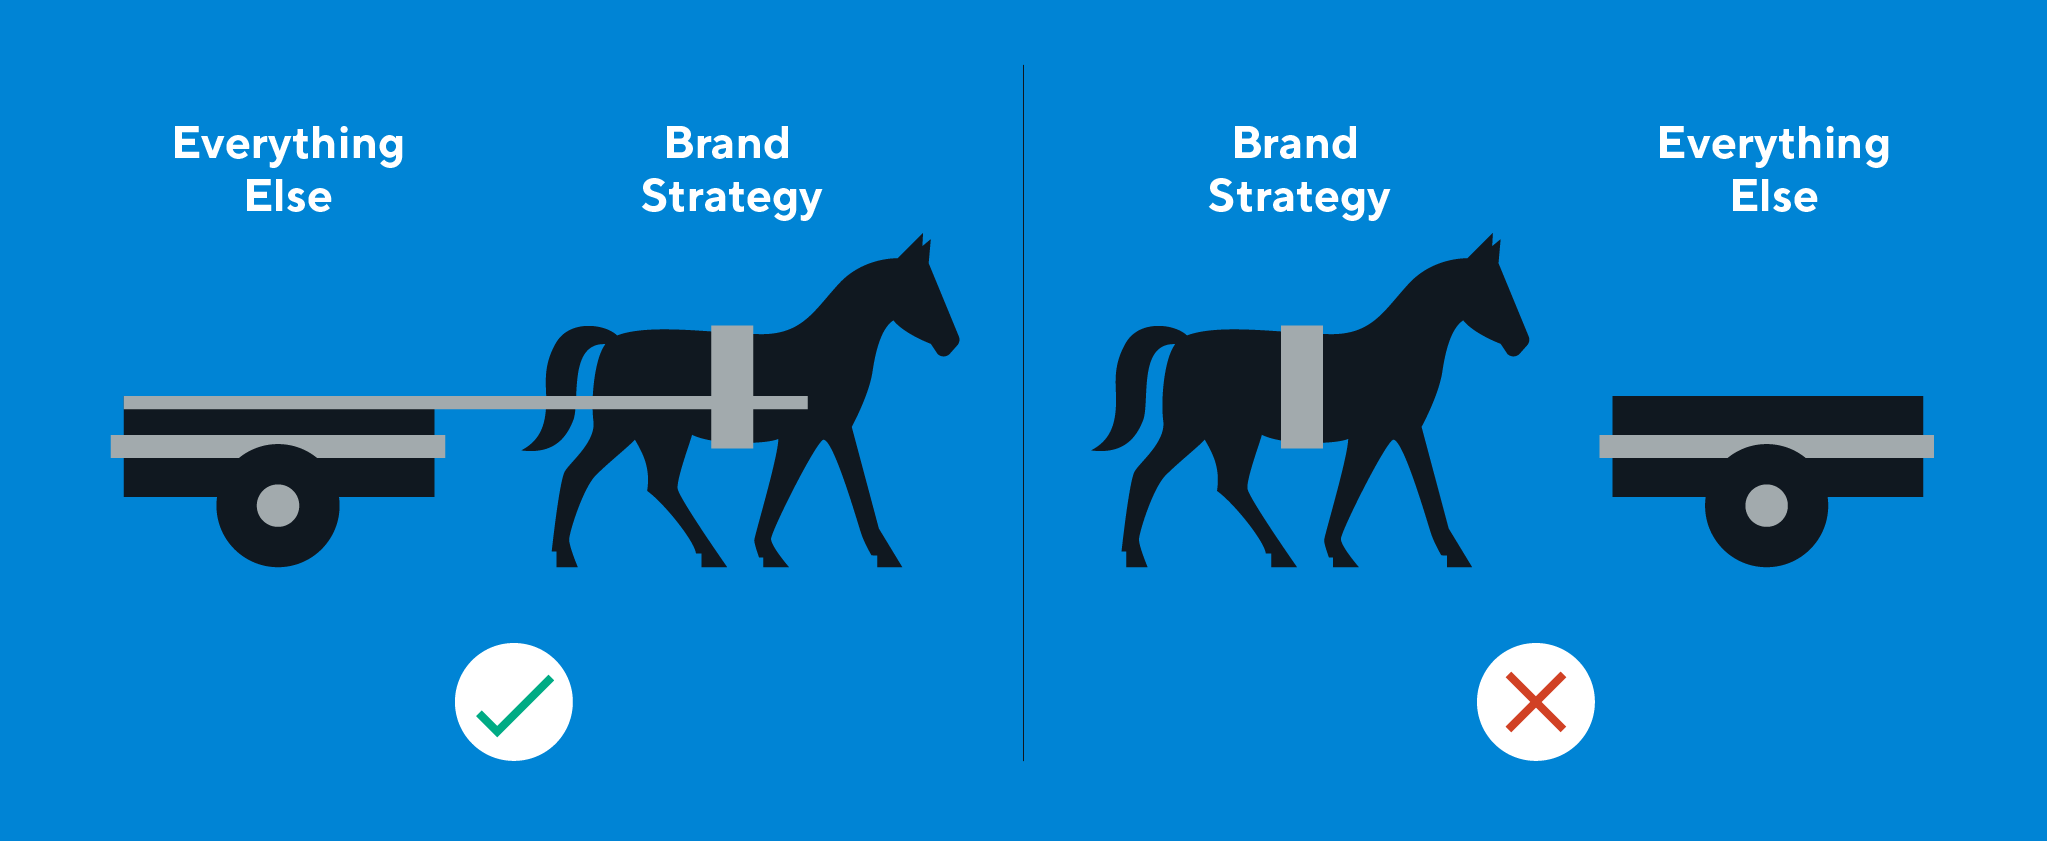 Illustration of brand strategy - don't put the cart before the horse